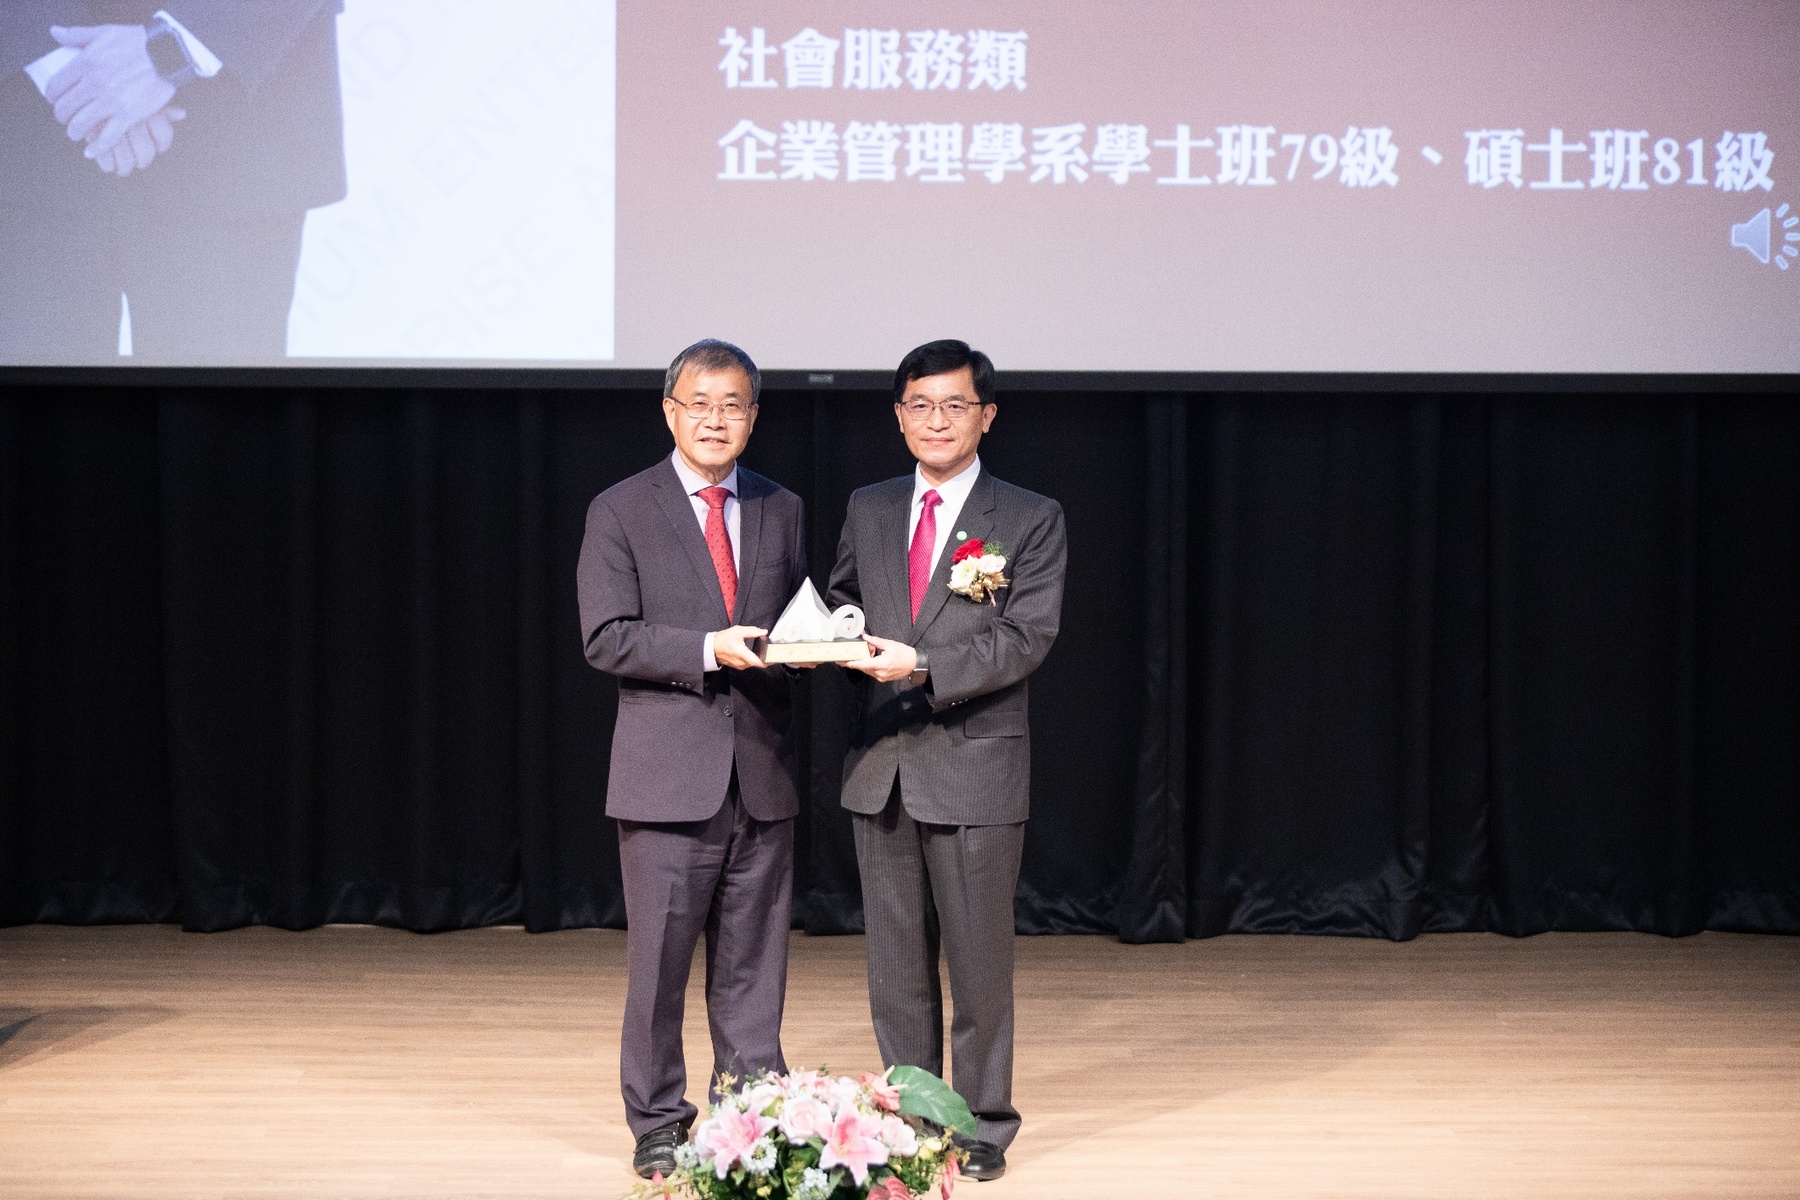 Director General of SMEA, MOE, Chin-Tsang Ho (on the right) graduated from the Department of Business Administration (BBA, 1990, MBA, 1992) and was awarded the Outstanding Alumni Award in the category of Social Service.